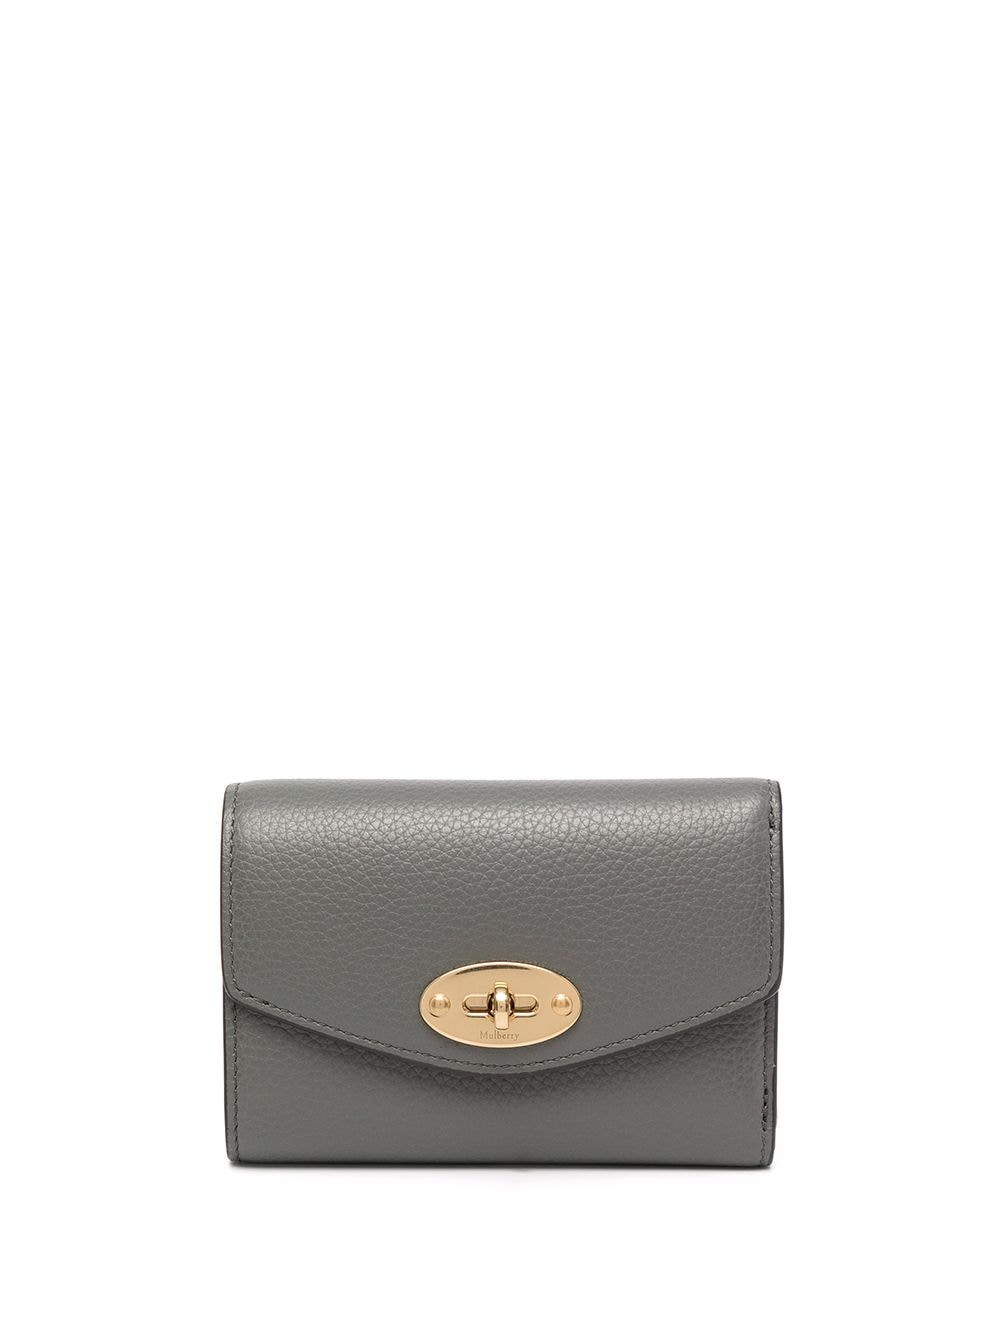 Mulberry Darley folded small wallet - Grey von Mulberry